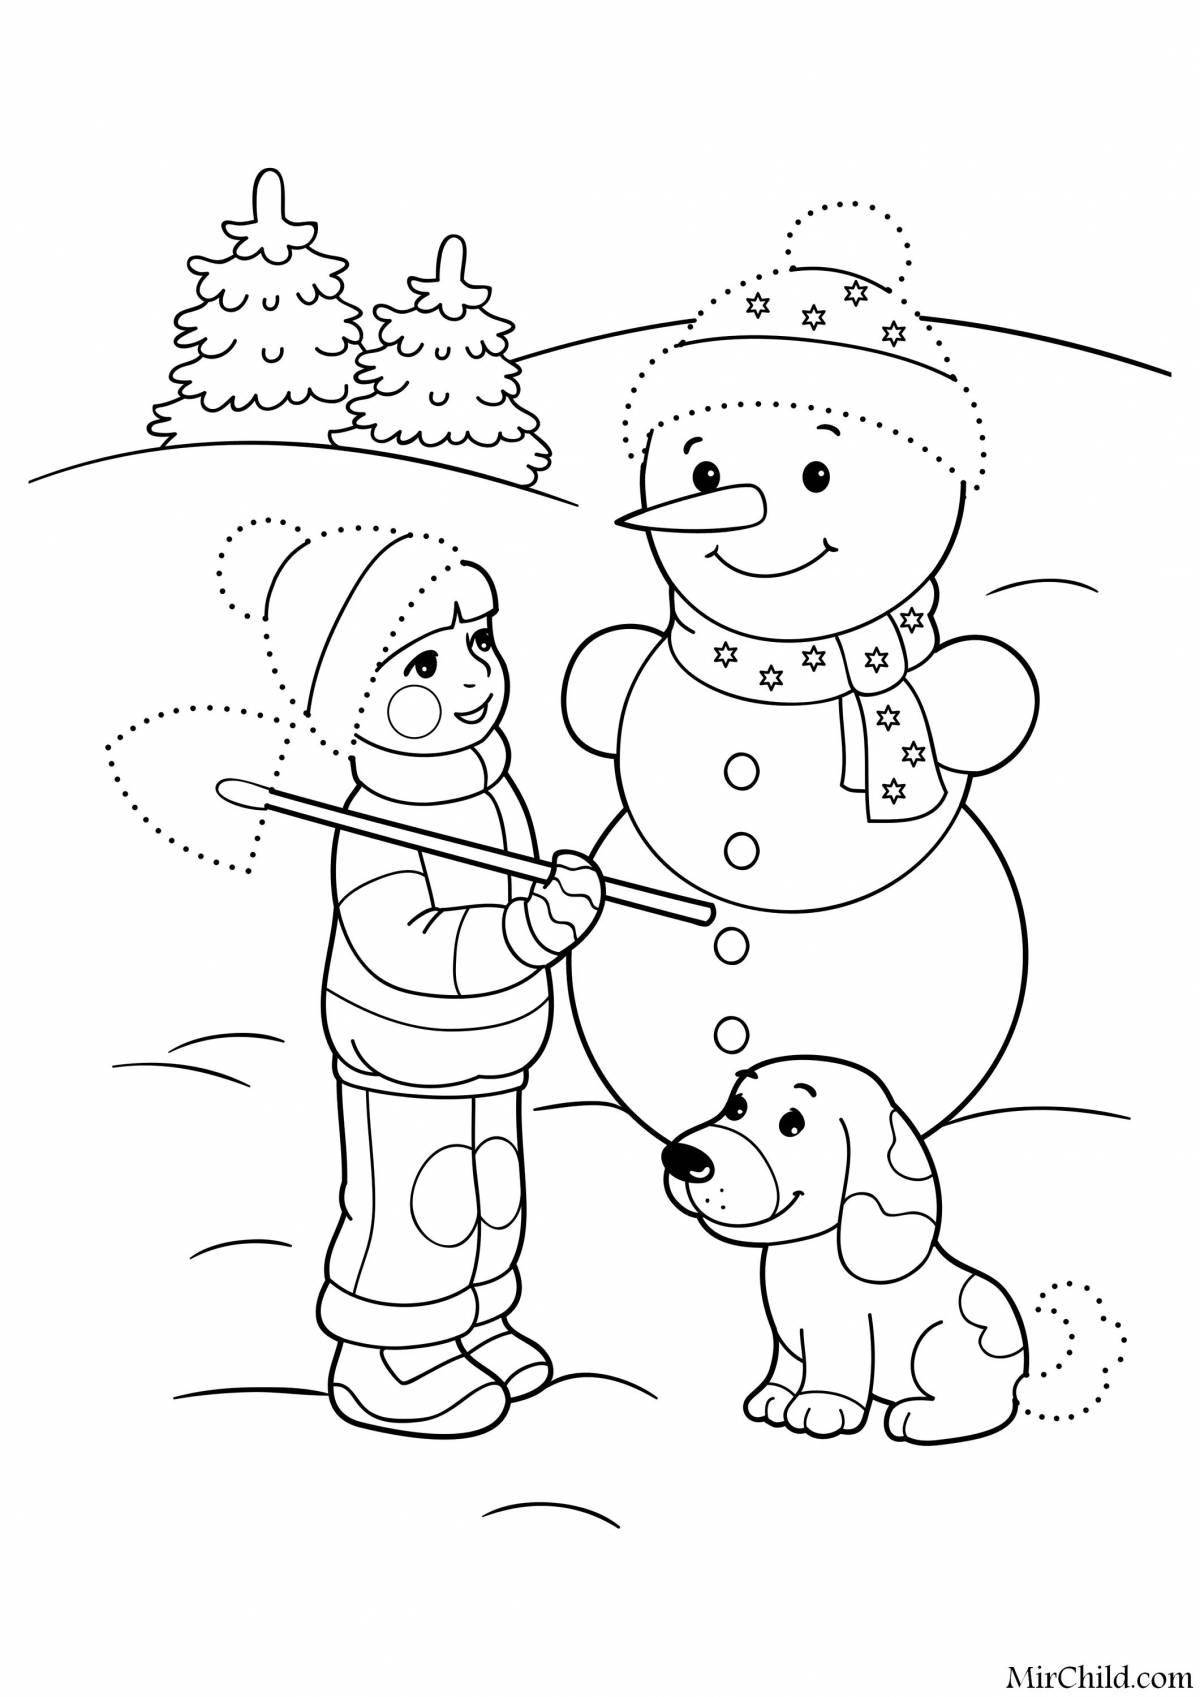 Exciting Christmas coloring book for preschoolers